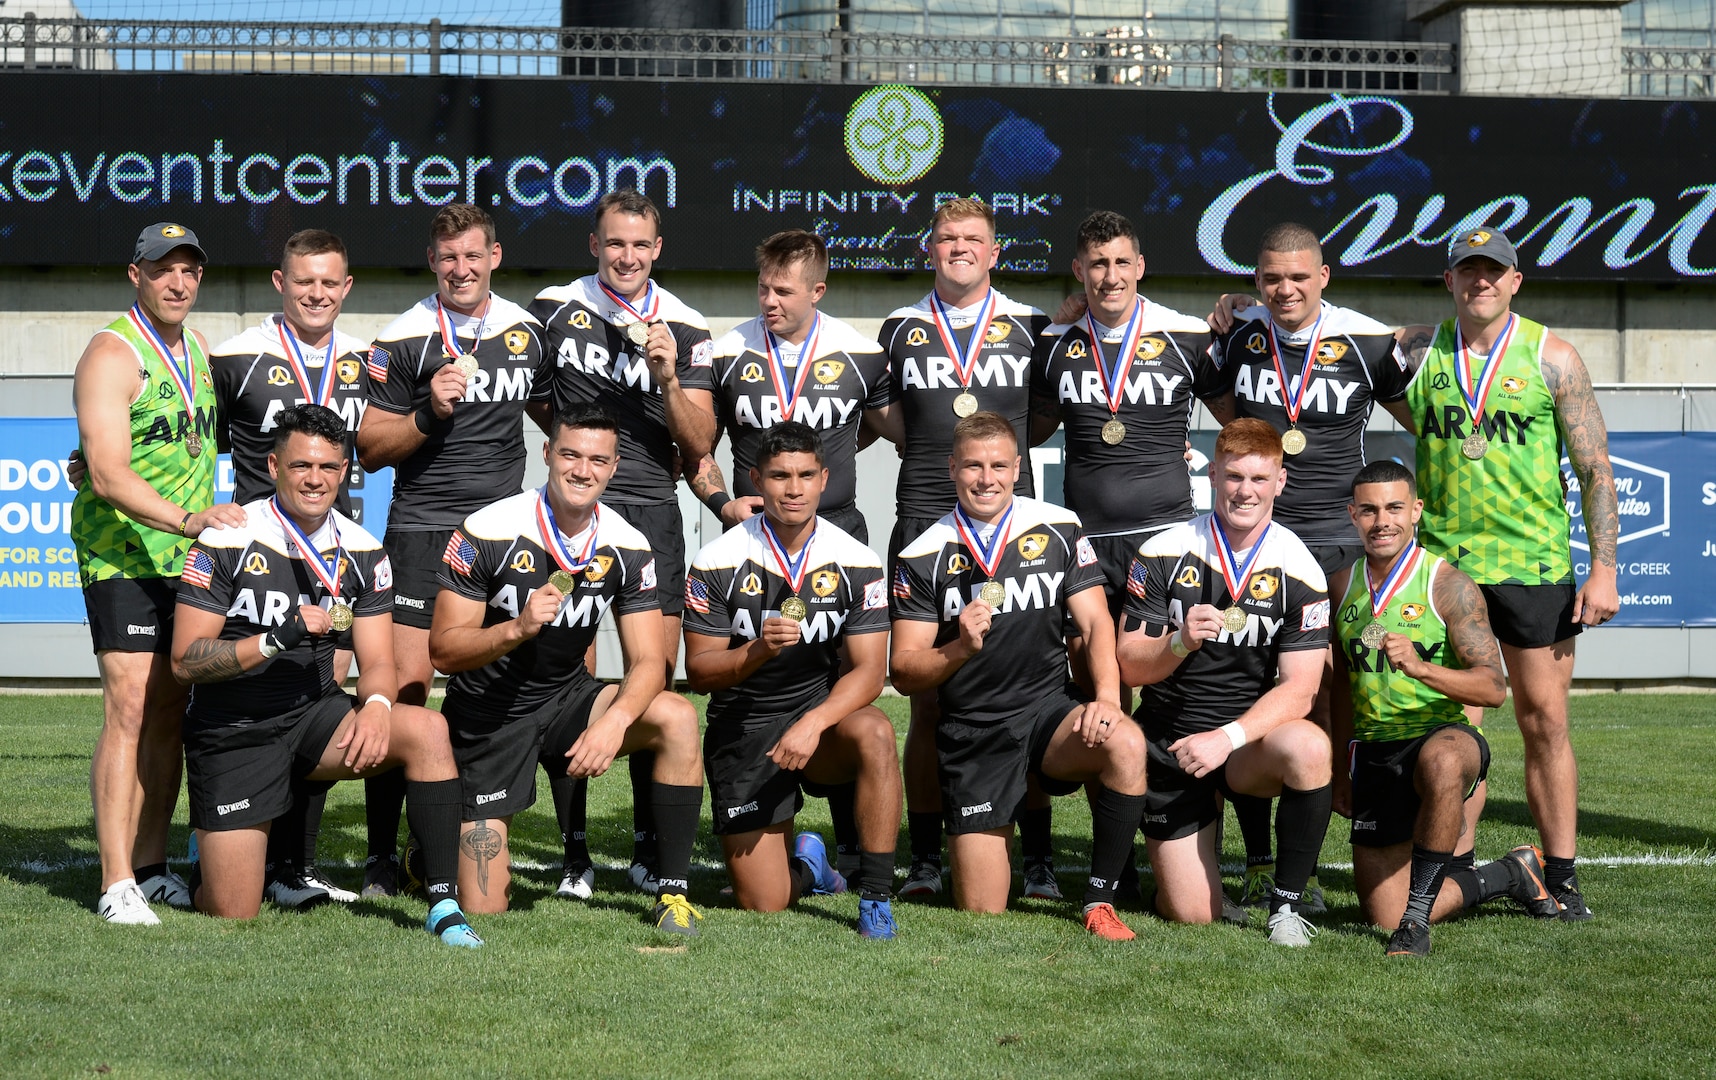 GLENDALE, Colo. (Aug. 24, 2019) Army take a team photo after winning gold in the 2019 Armed Forces Rugby Championship hosted by the city of Glendale, Colo. in conjunction with the 2019 Rugbytown Sevens Tournament, held from 23- 25 August.  Service members from the Army, Marine Corps, Navy, Air Force and Coast Guard battle it out for gold in this world class rugby championship. (U.S. Dept. of Defense photo by Mass Communication Specialist 1st Class Timothy Hazel/RELEASED)